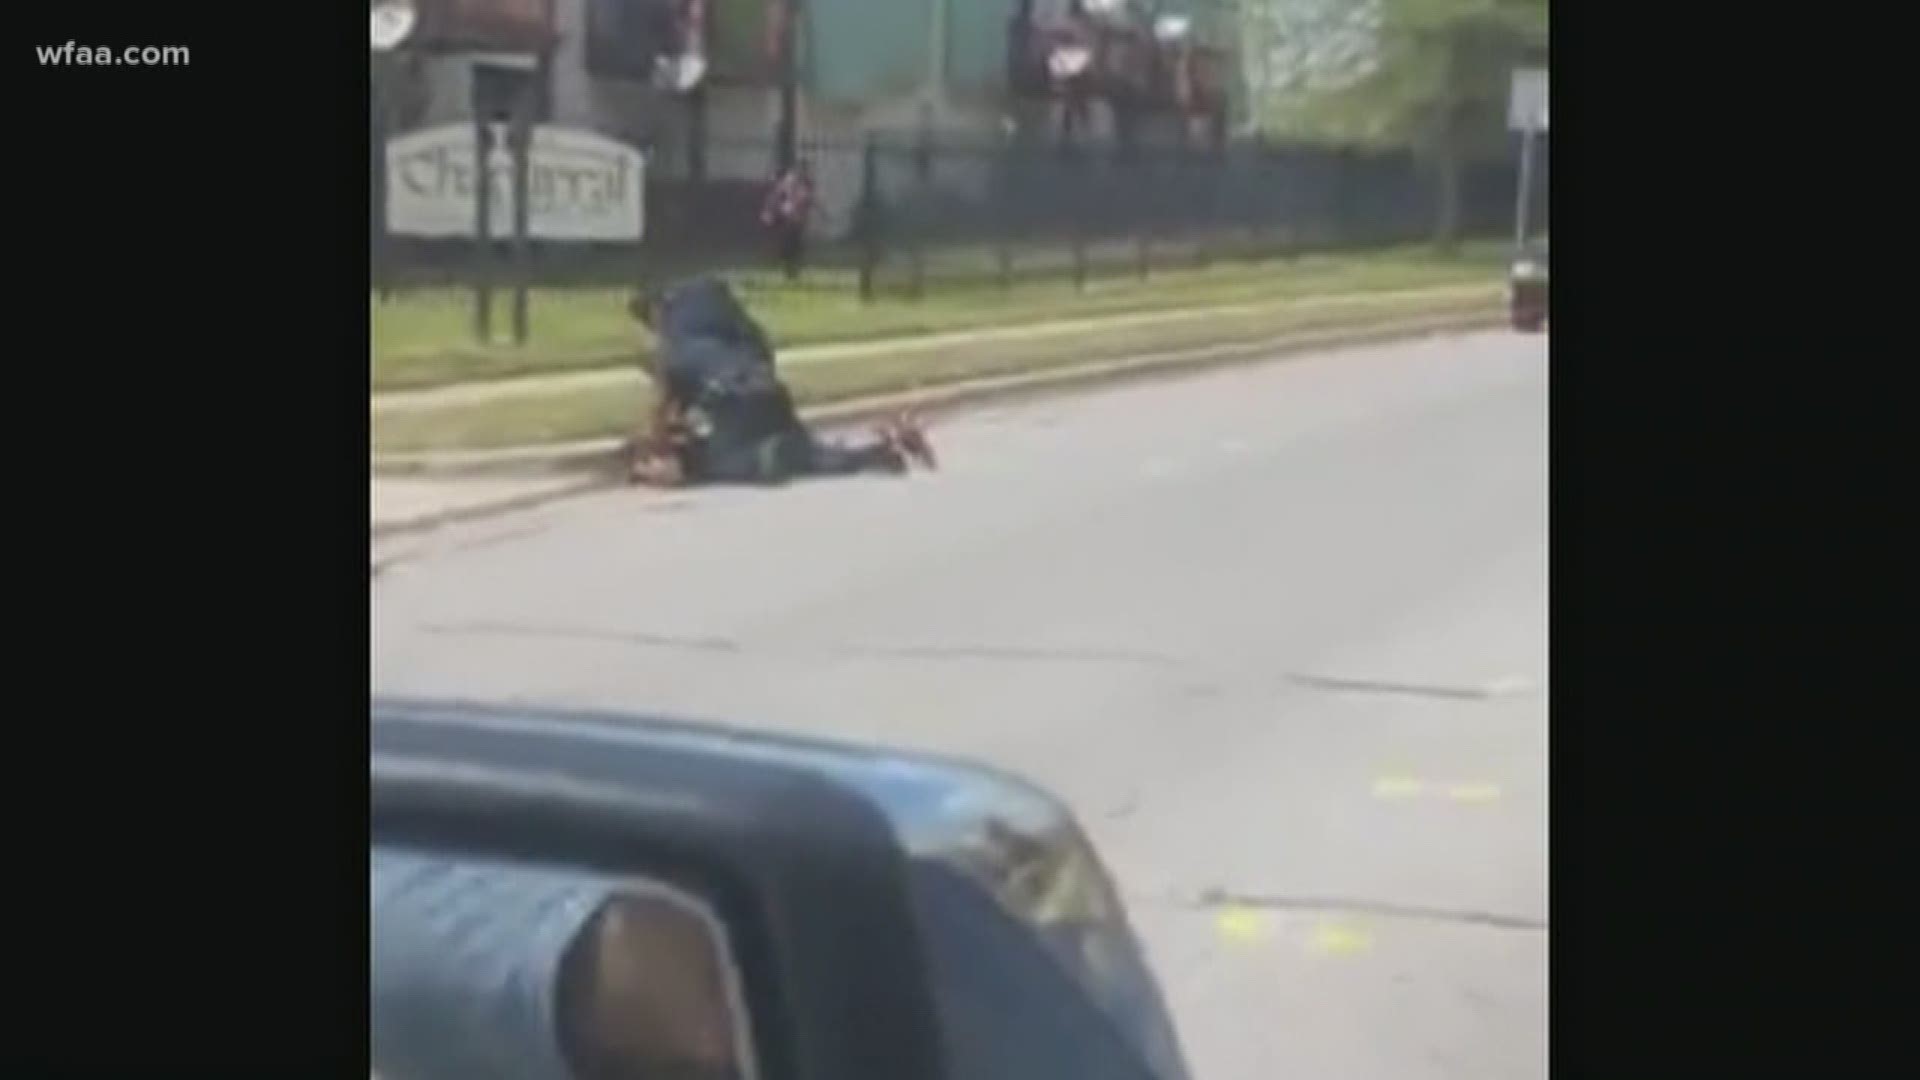 Fort Worth police have released a statement addressing an arrest video in which officers were seen striking a man while trying to handcuff him outside of an apartment complex Saturday.